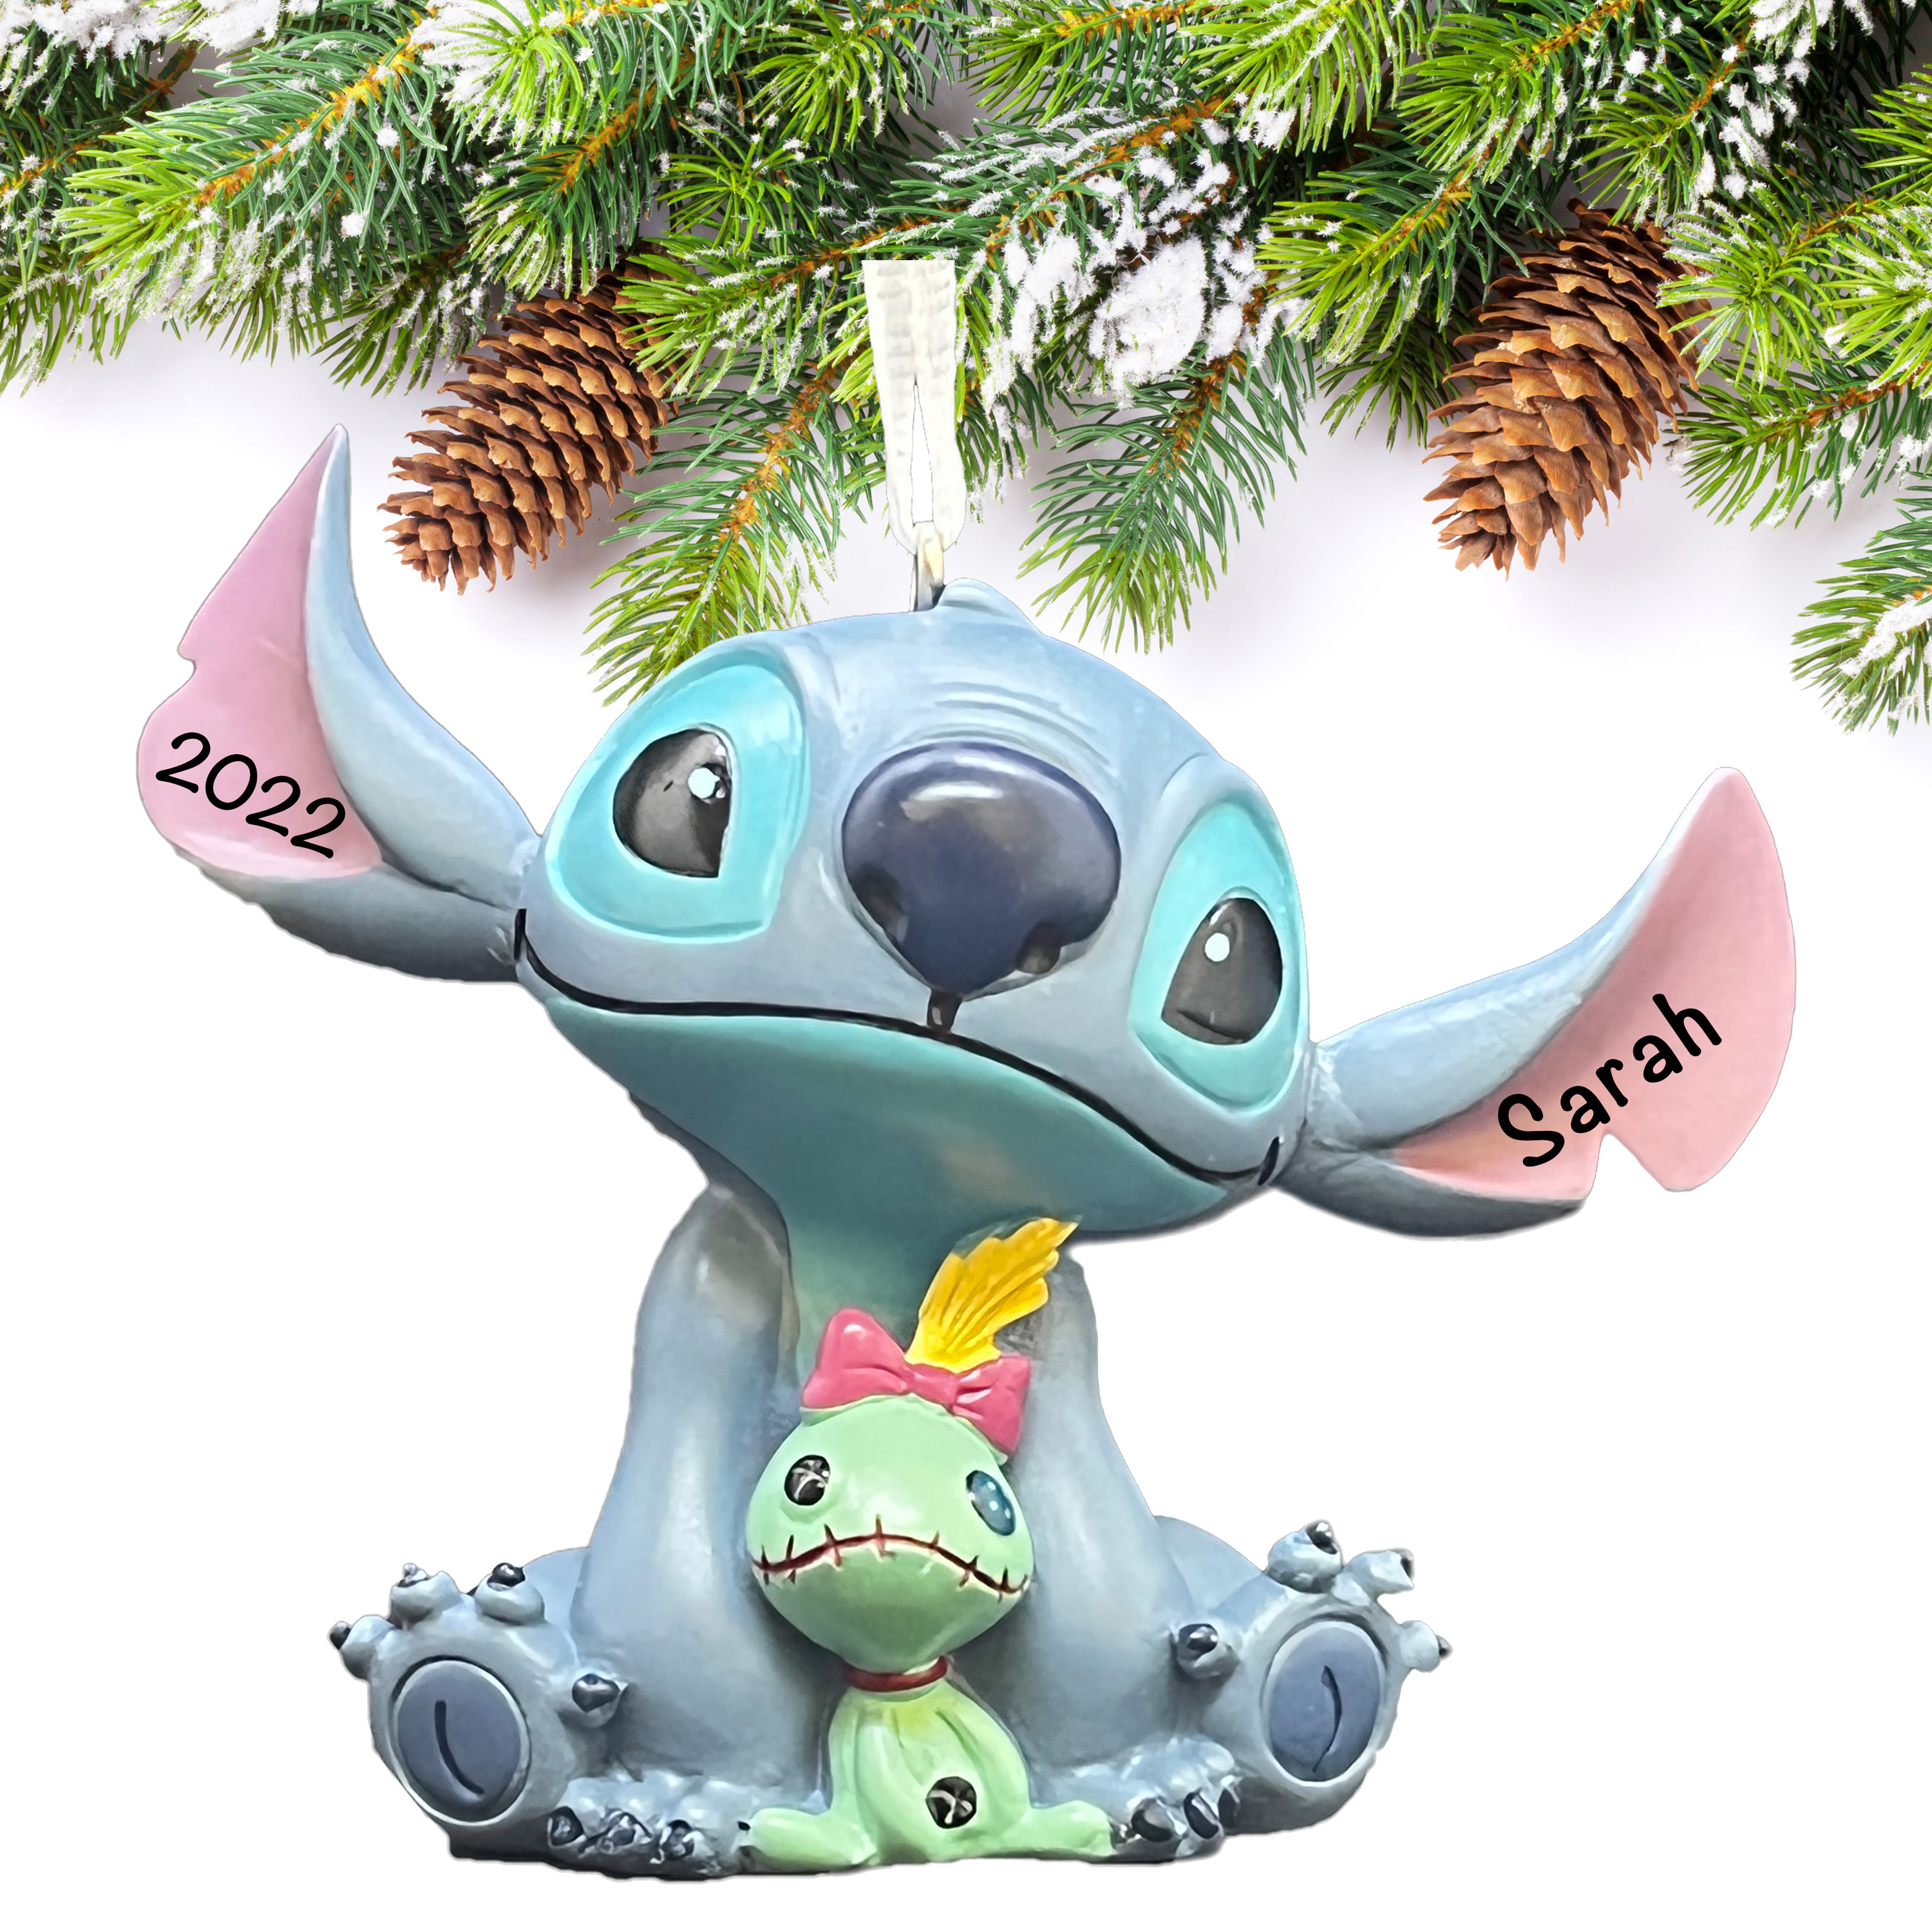 https://myornament.com/wp-content/uploads/2022/10/2HCM9023-Lilo-and-Stitch-Ornament-Stitch-Disney-Ornament-Personalized-Lilo-and-Stitch-Christmas-Ornament-Holiday-Traditions-Gifts-For-Kids-Xmas.jpg